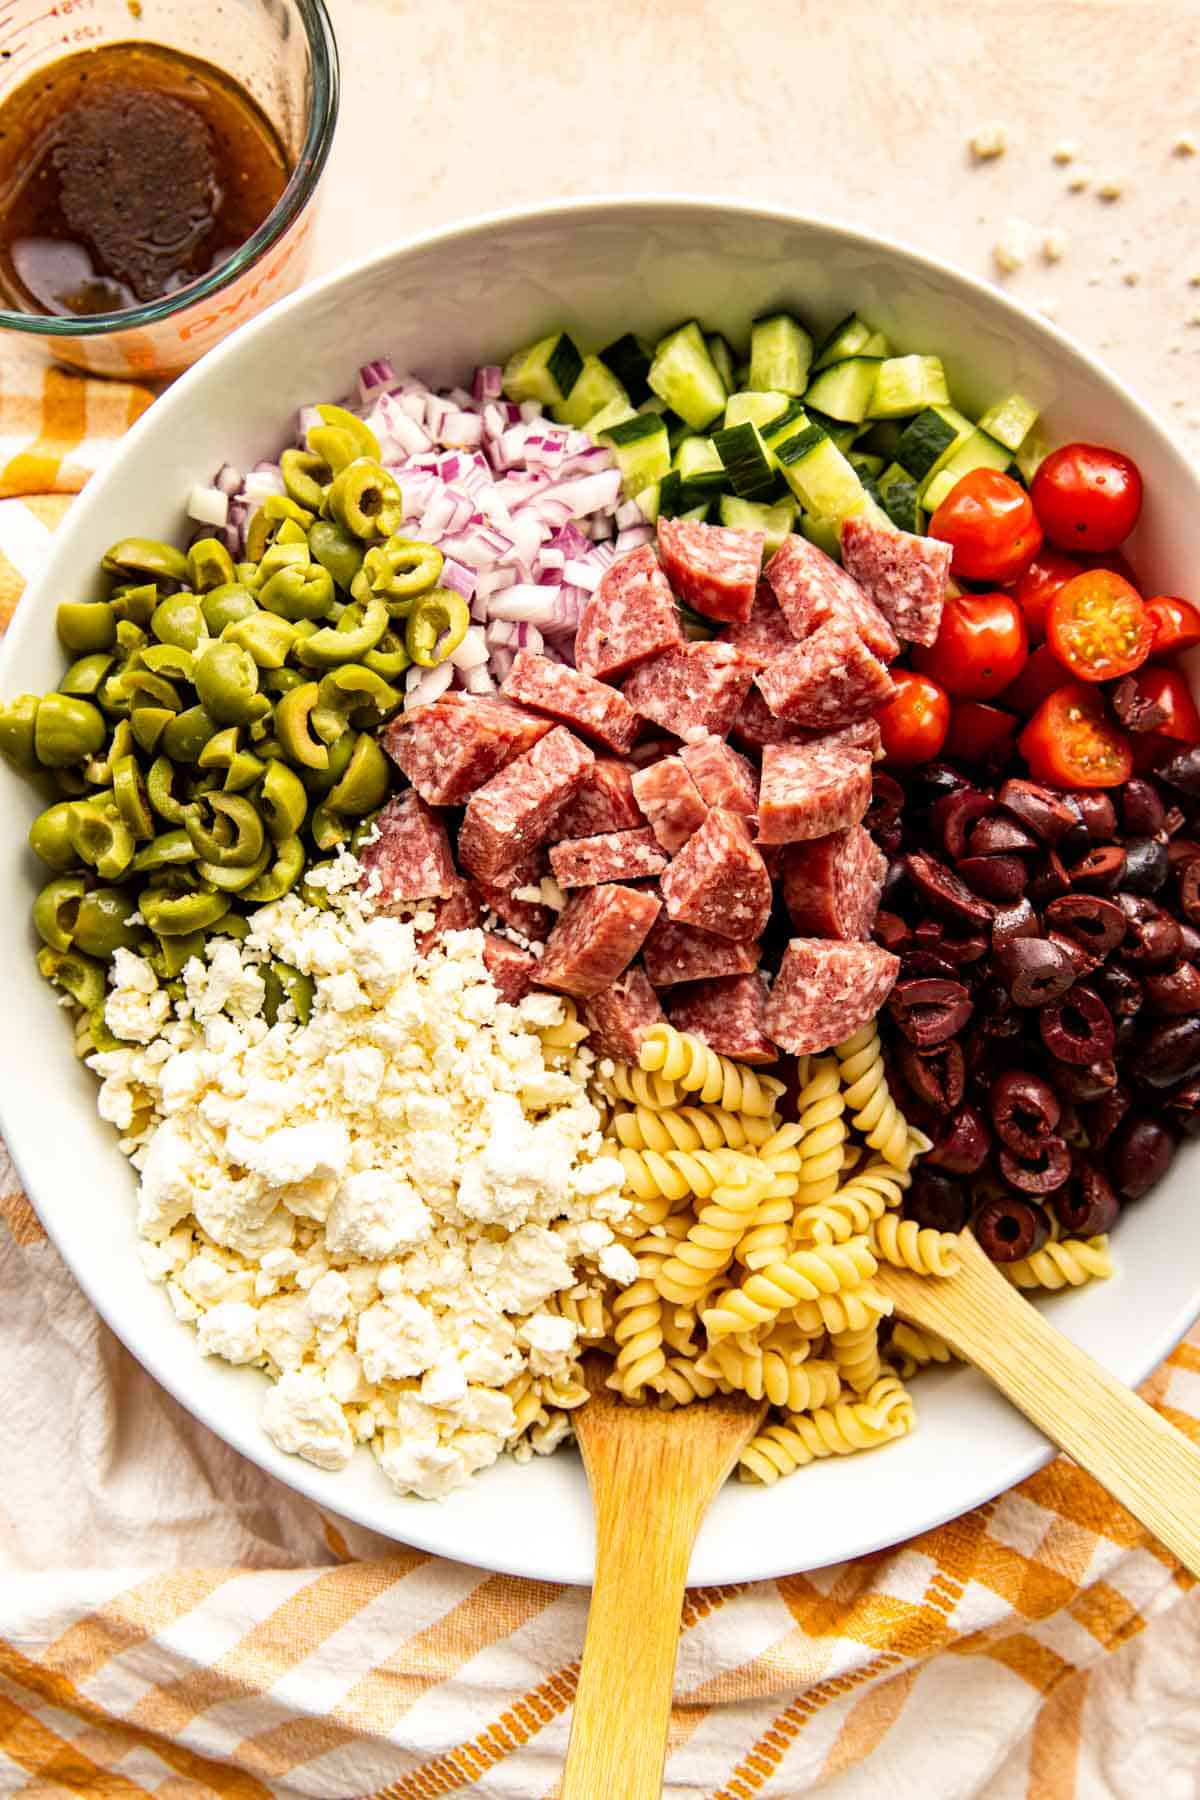 olives, red onions, tomatoes, salami, feta, and pasta in a large bowl with wooden spoons next to a measuring cup with dressing